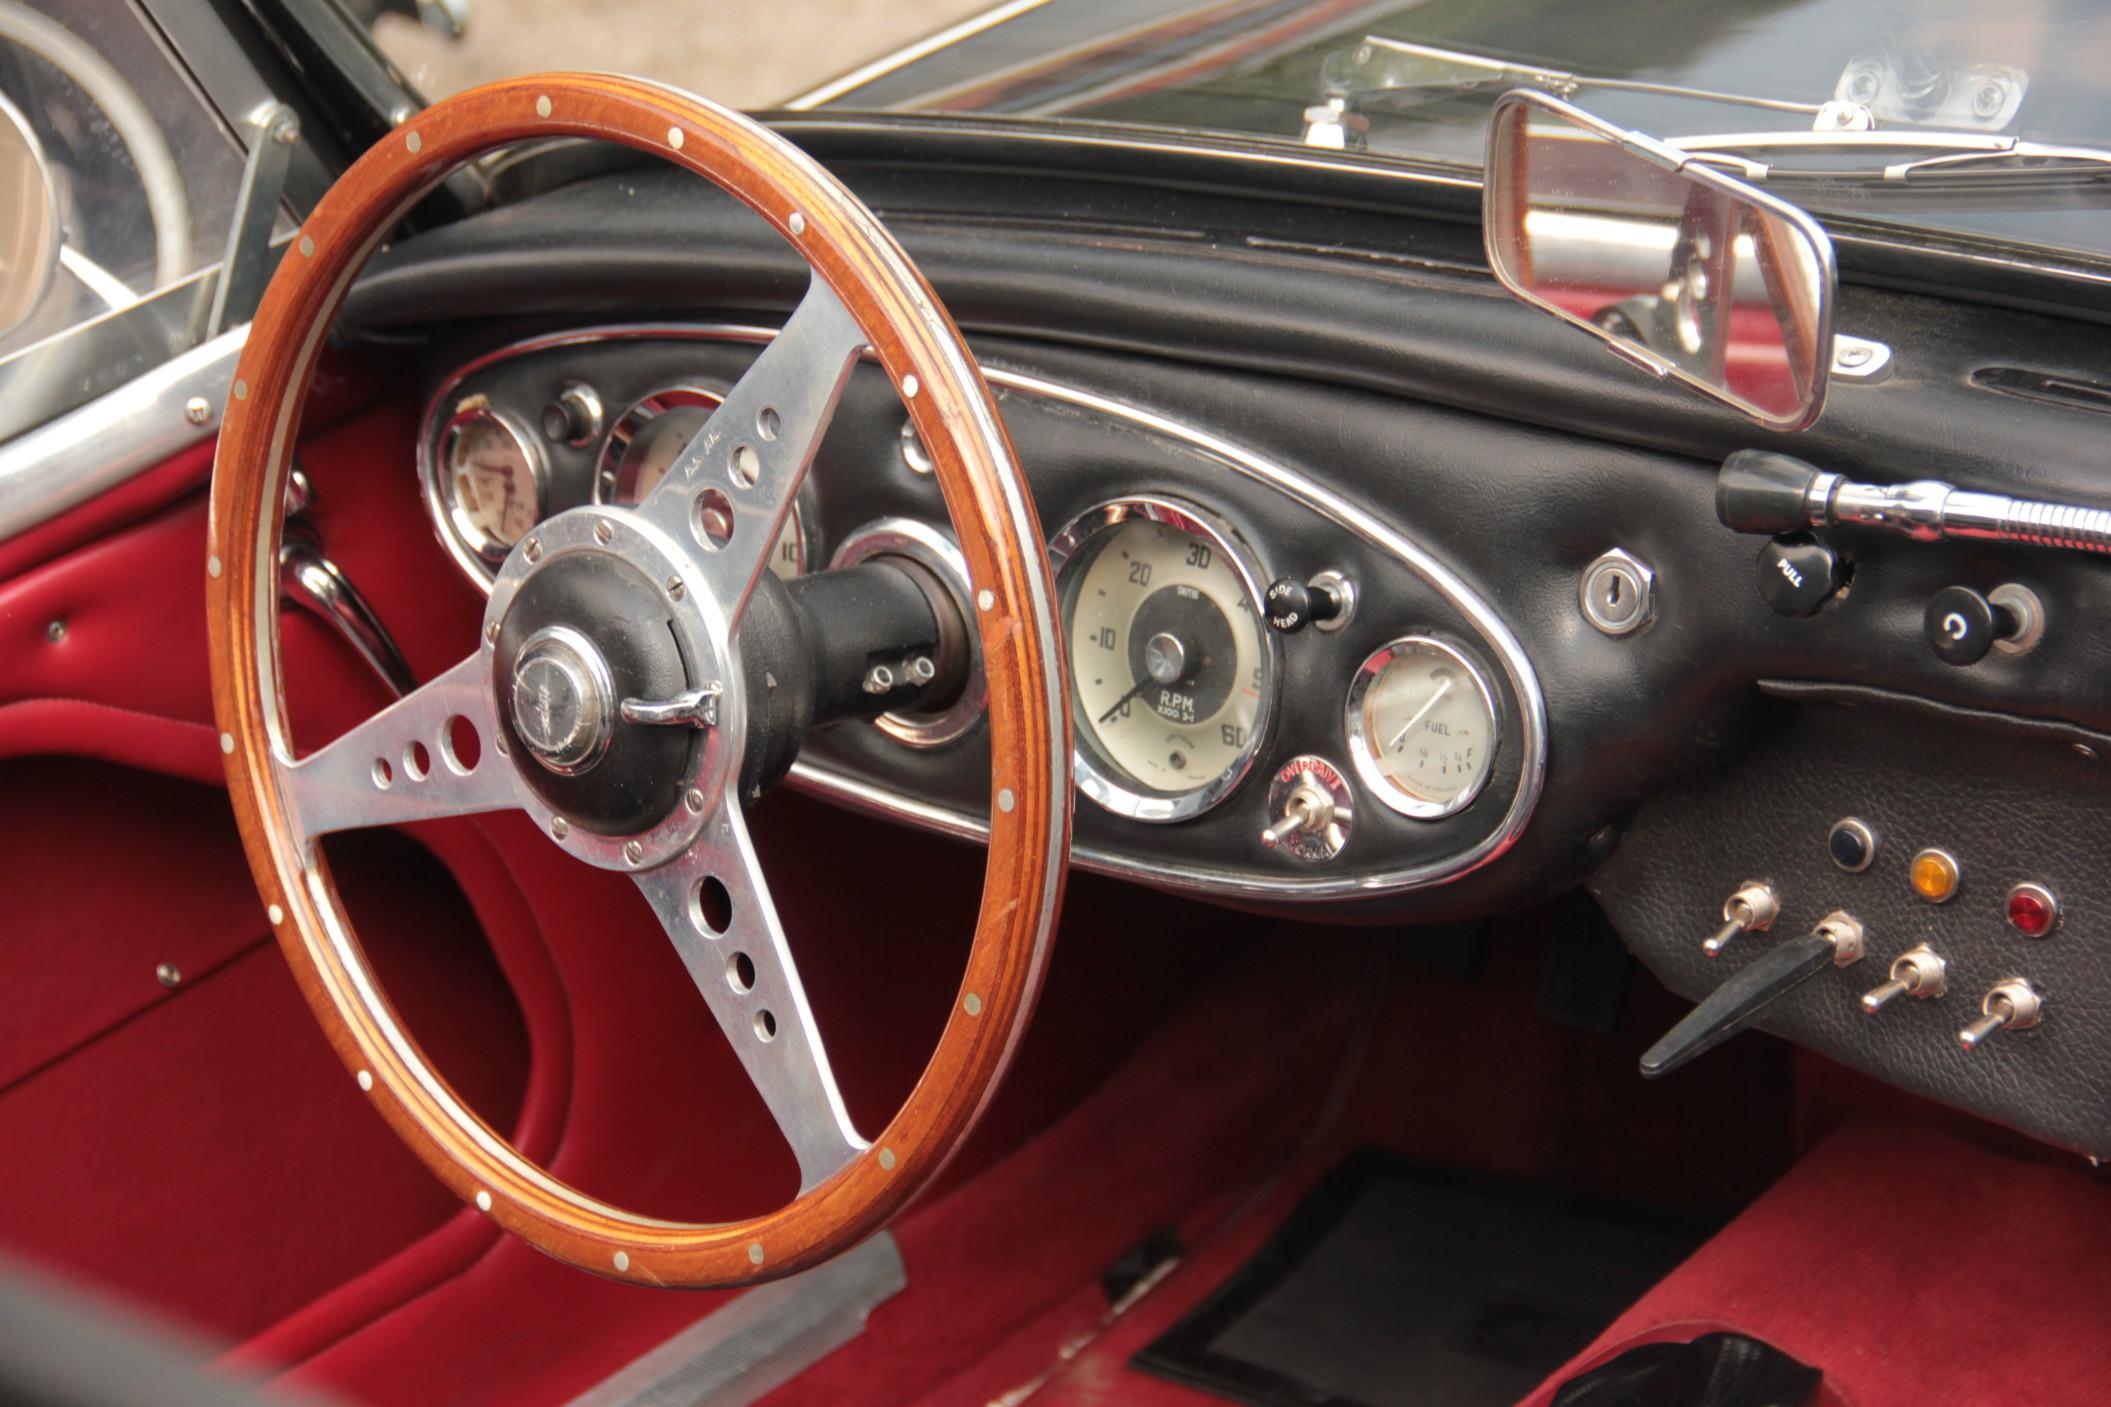 Jay Leno’s collection includes countless one-of-a-kind cars.